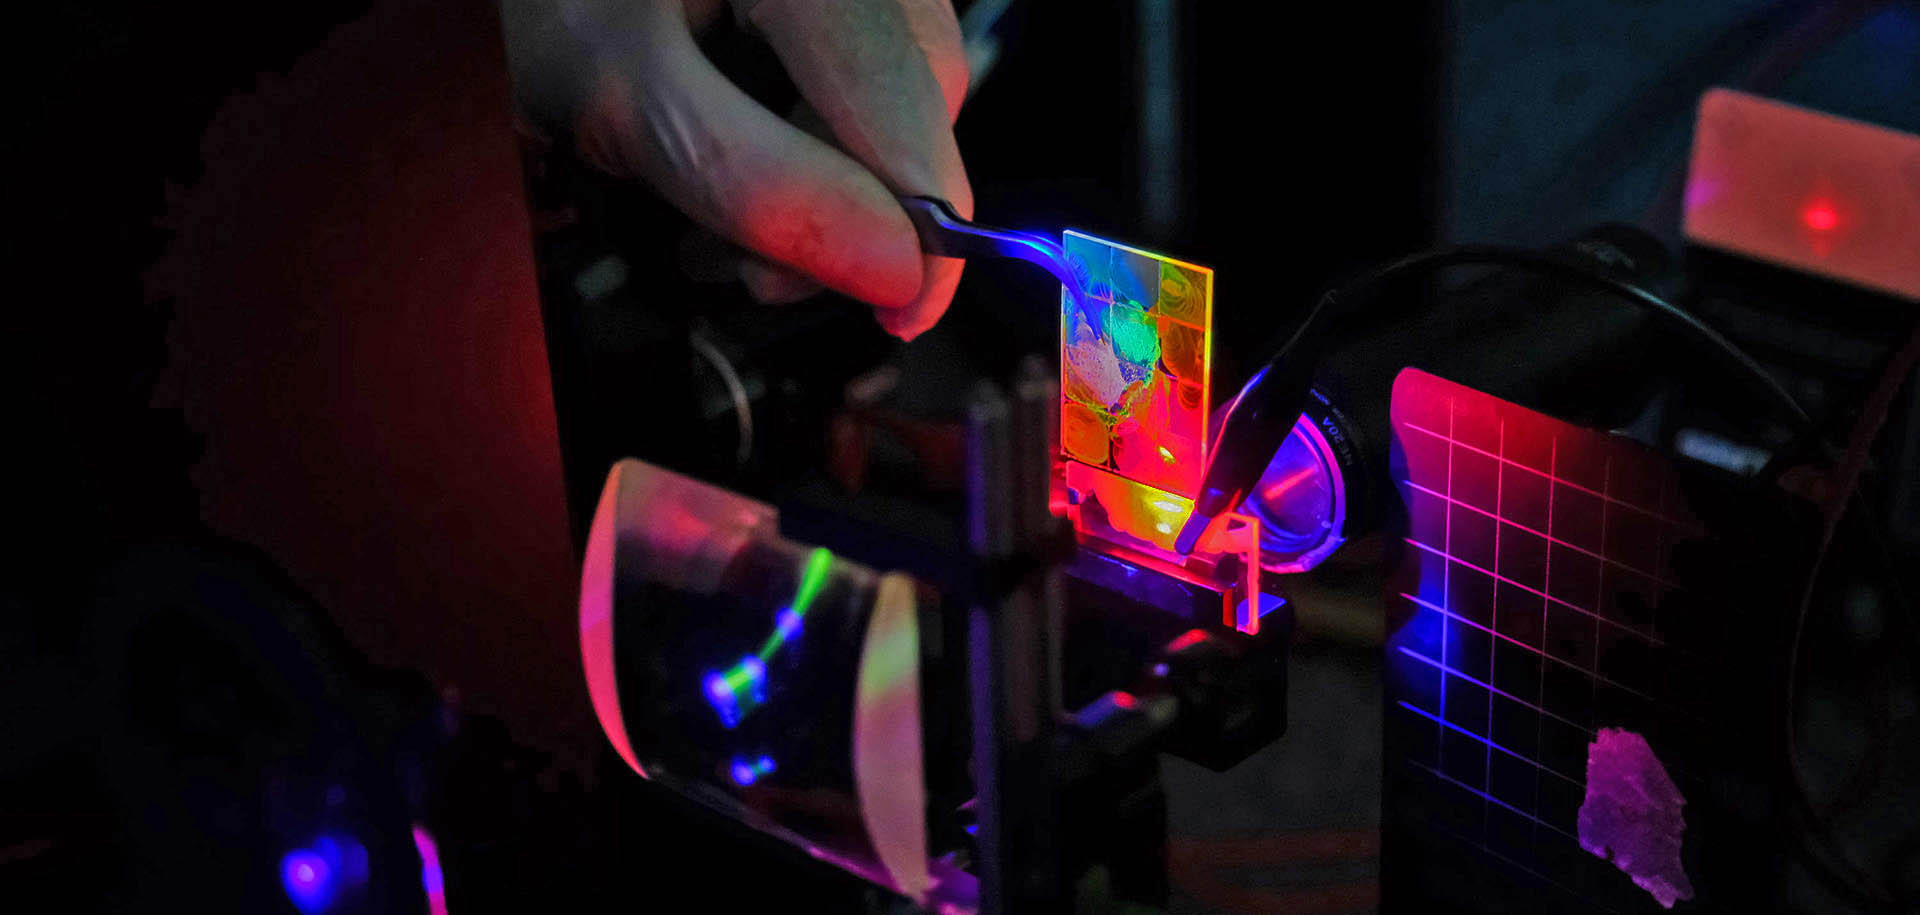 Colloidal Quantum Dot Laser is getting closer to a electrically pumped device